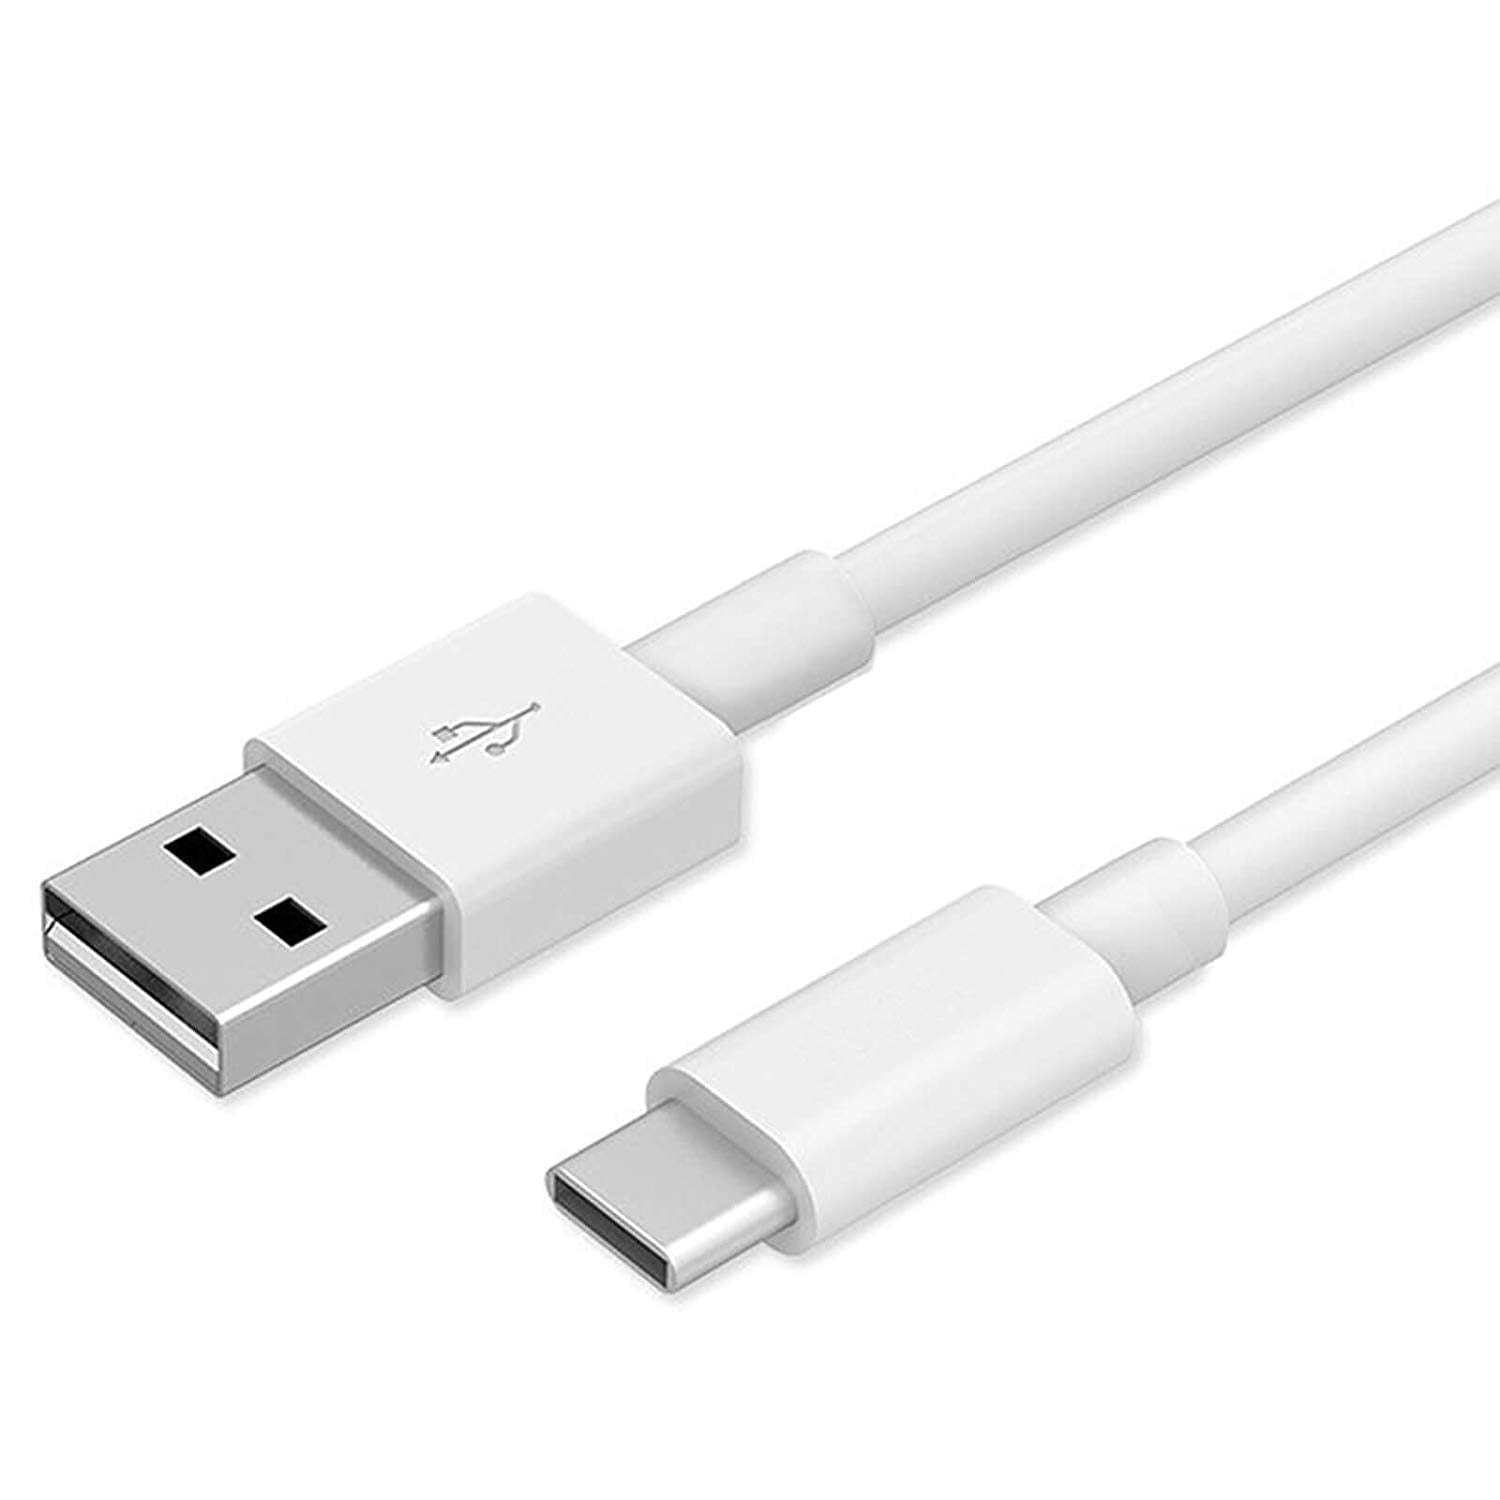 Samsung Galaxy S20 USB to Type C Charging Cable In Car White - 50 CM Short - SmartPhoneGadgetUK